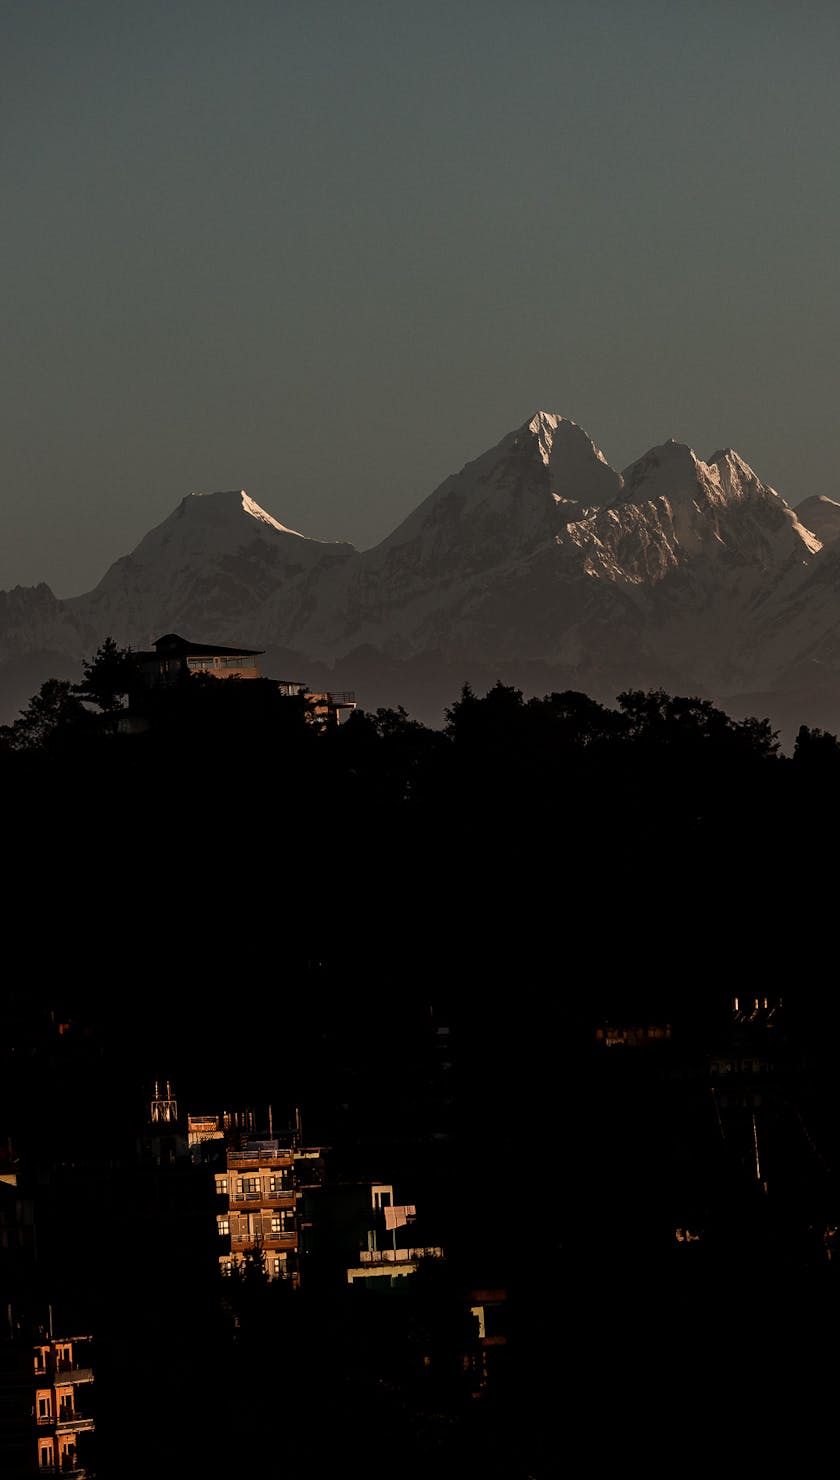 International Gathering Nepal - Mountains in the distance